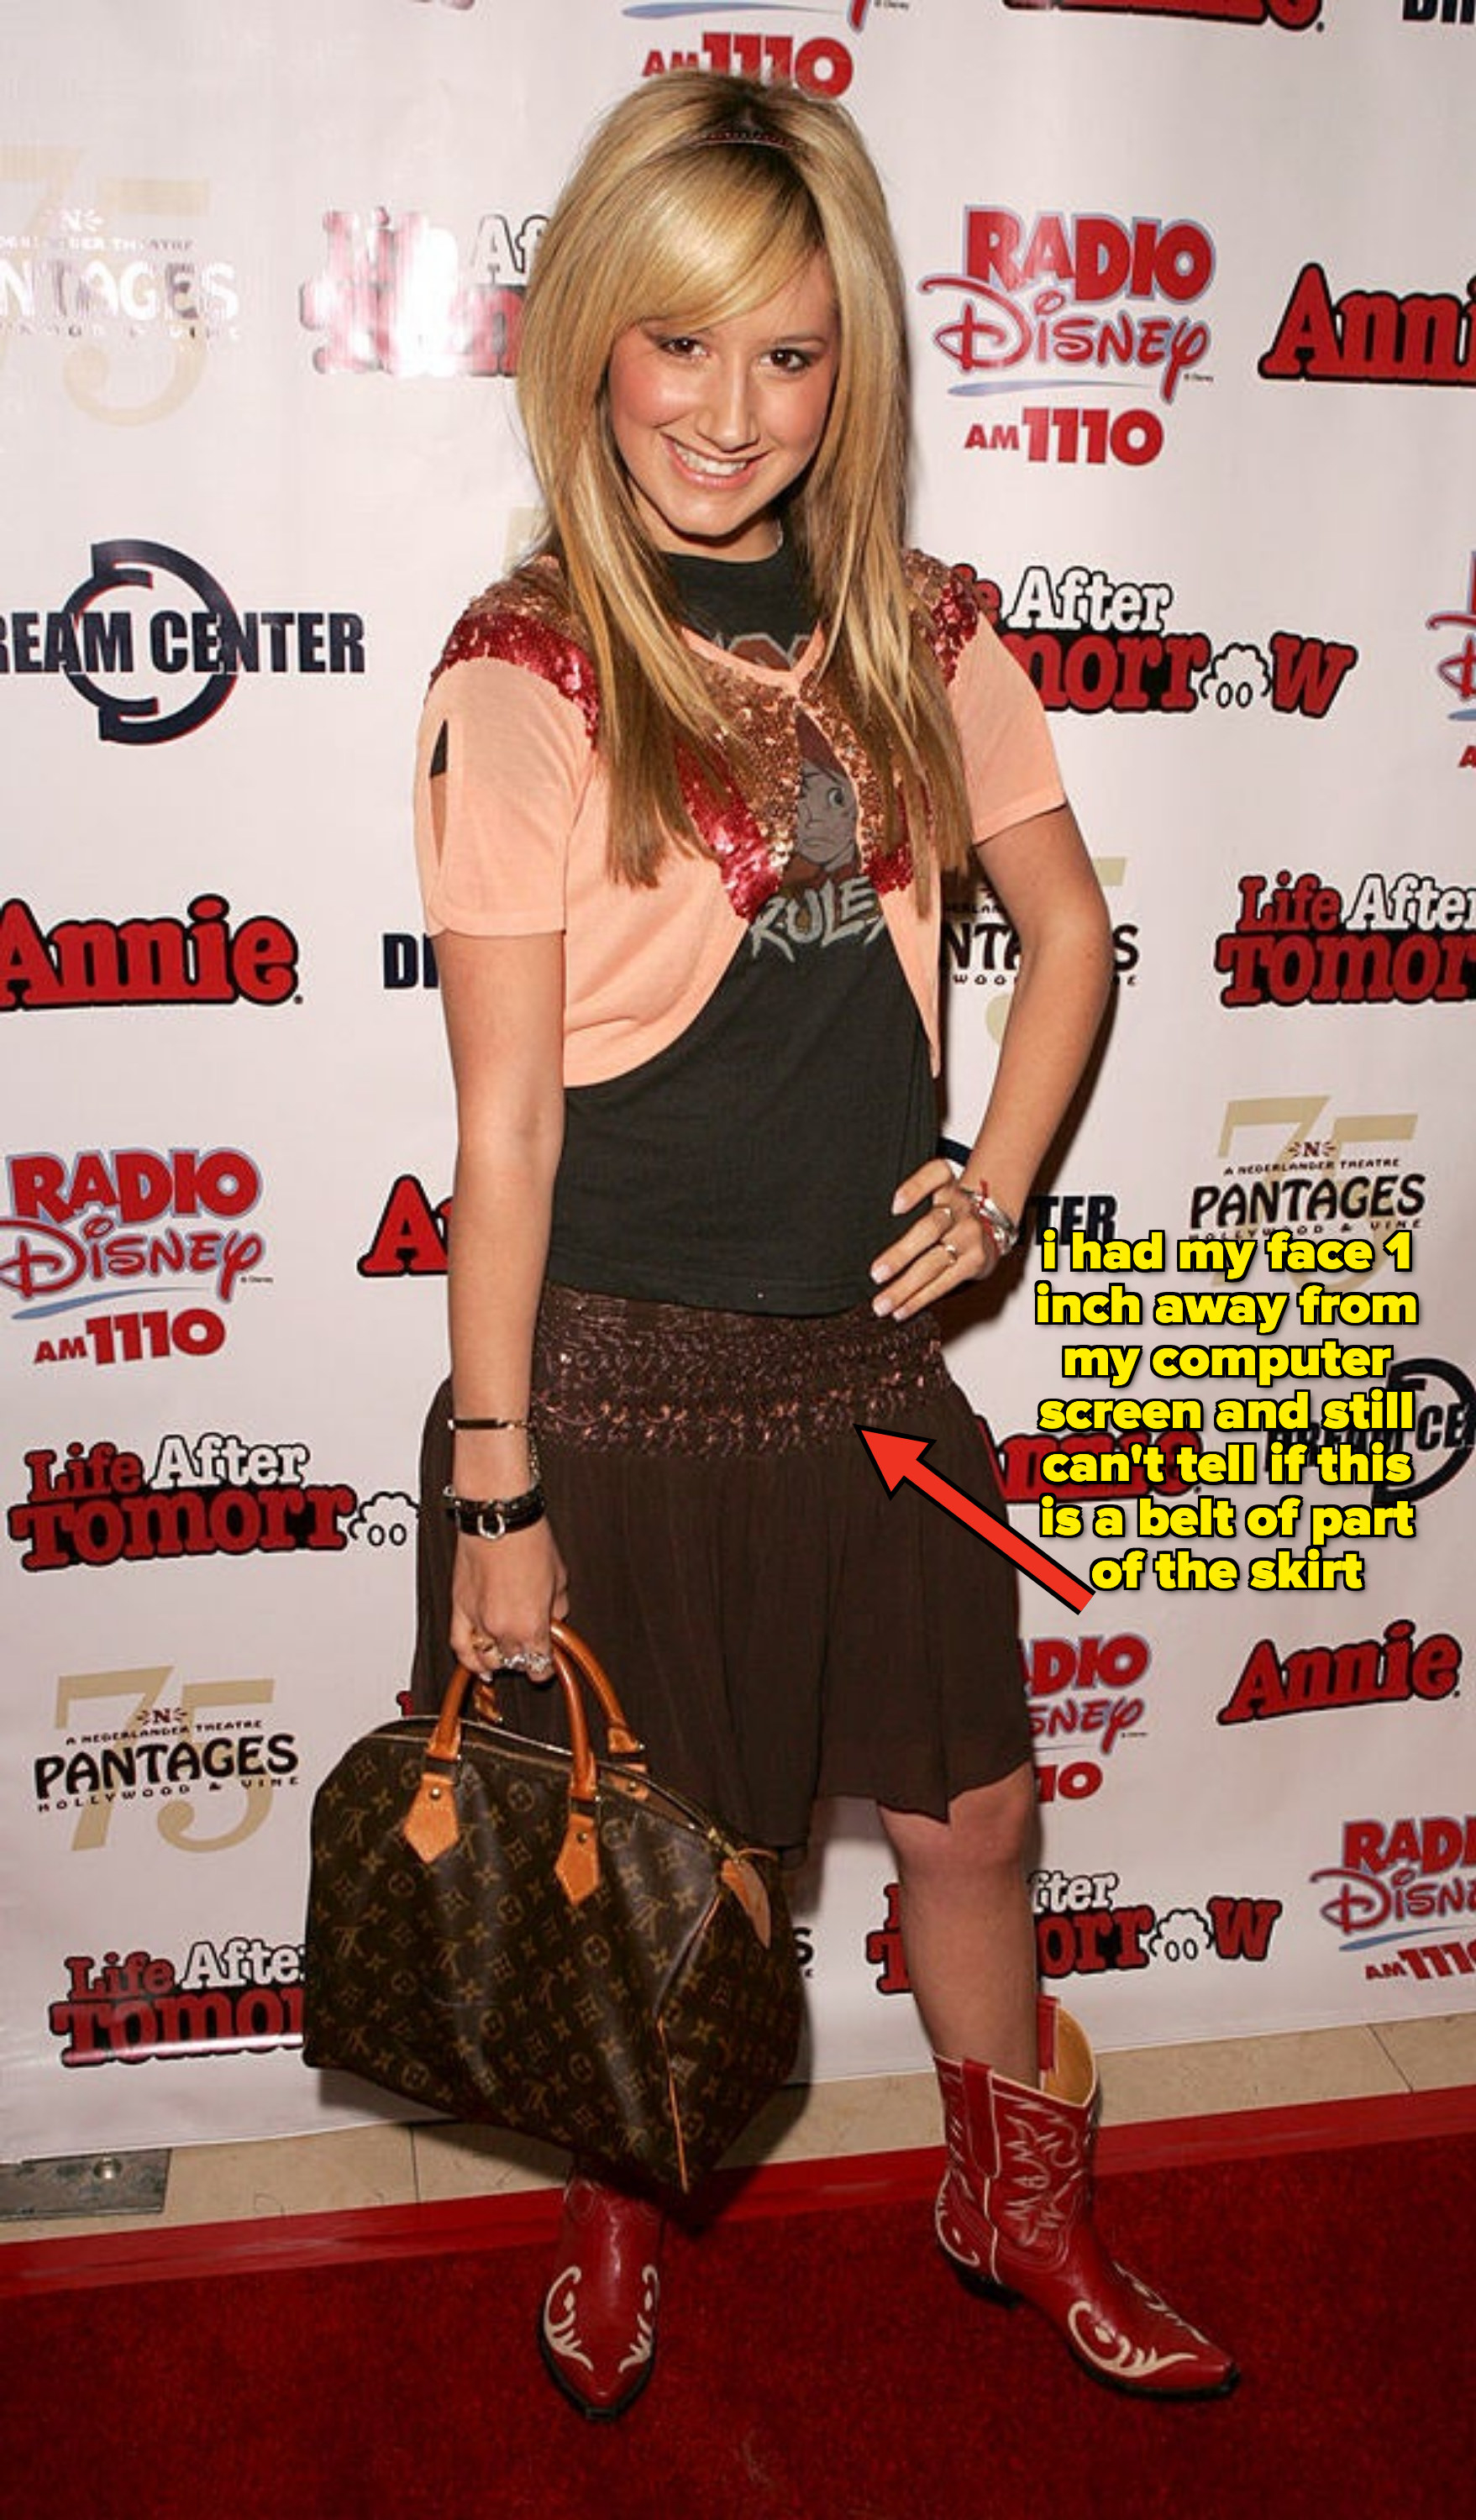 Ashley Tisdale on the red carpet